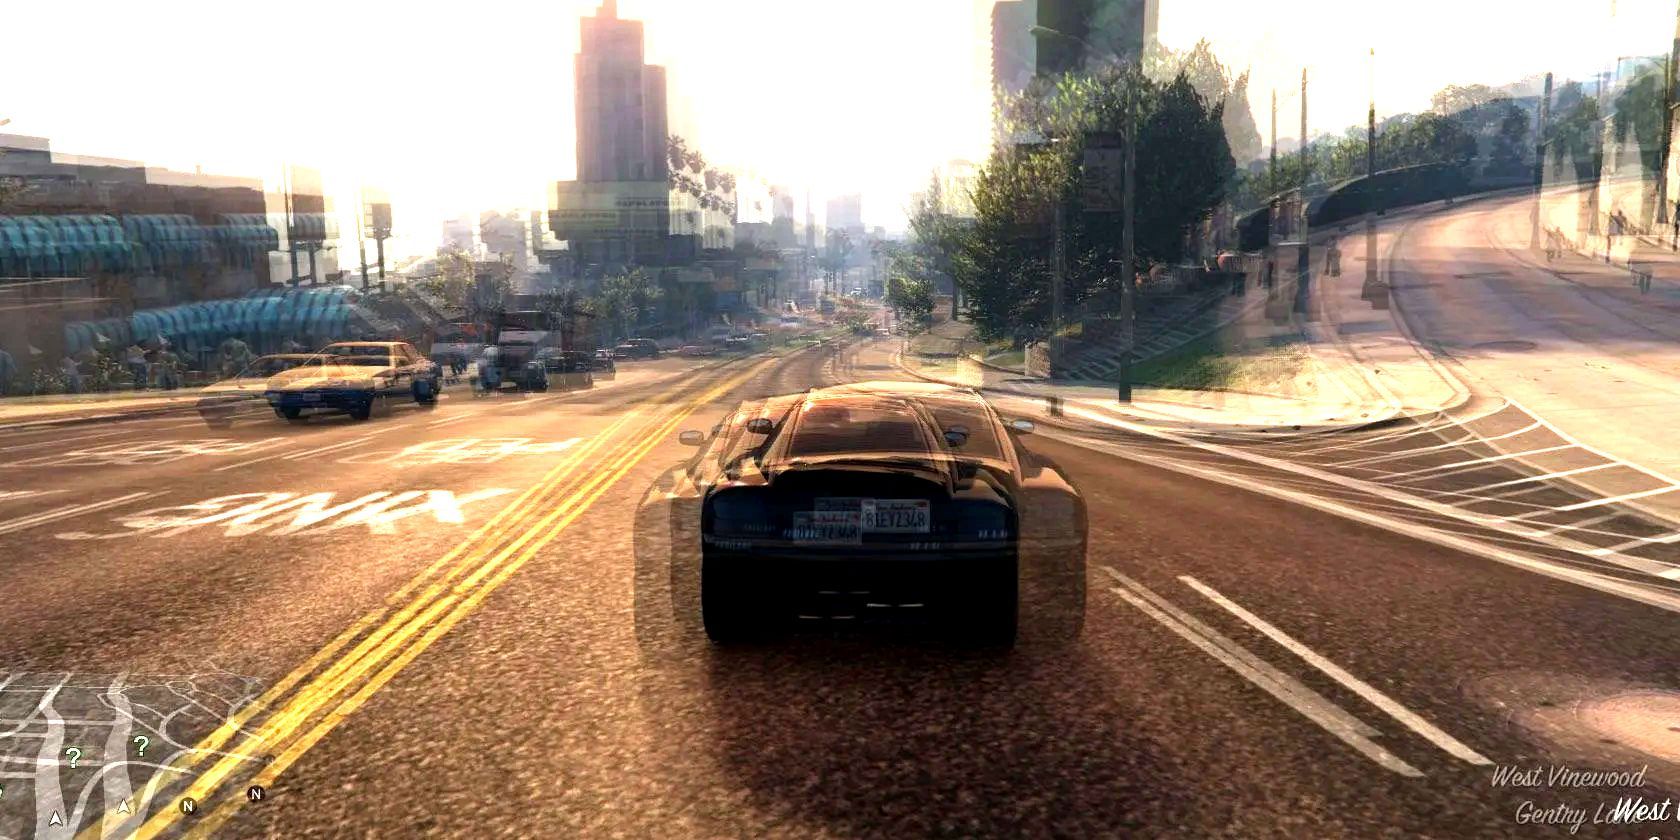 Screenshot of Grand Theft Auto V with shake effect to illustrate low frame rate